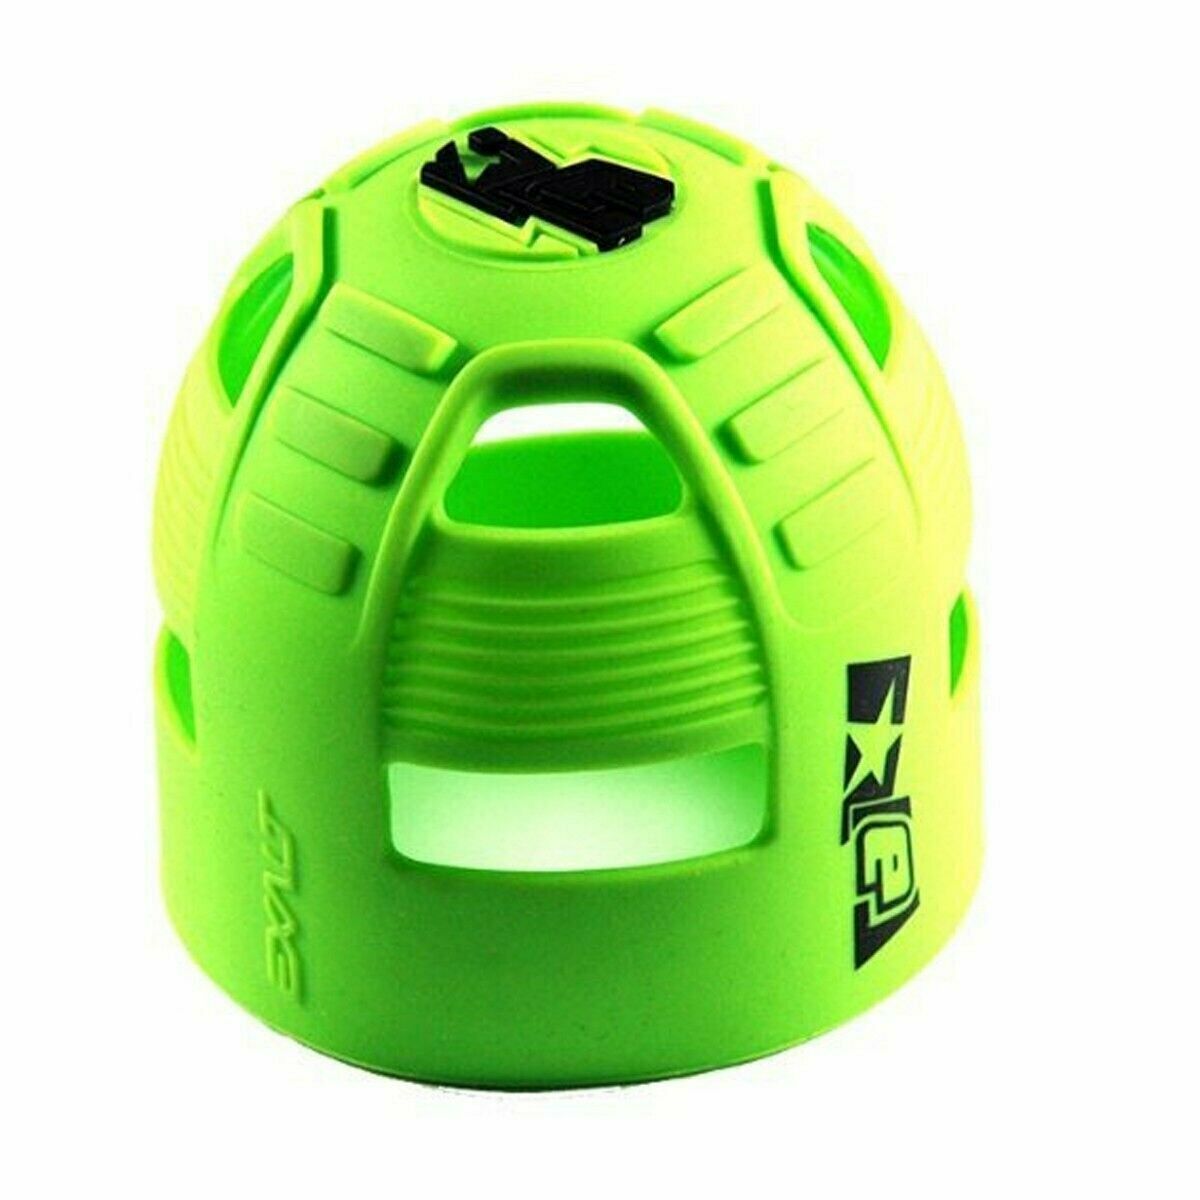 Planet Eclipse Hpa Tank Grip Cover By Exalt - 45-77ci Sizes - Lime Black